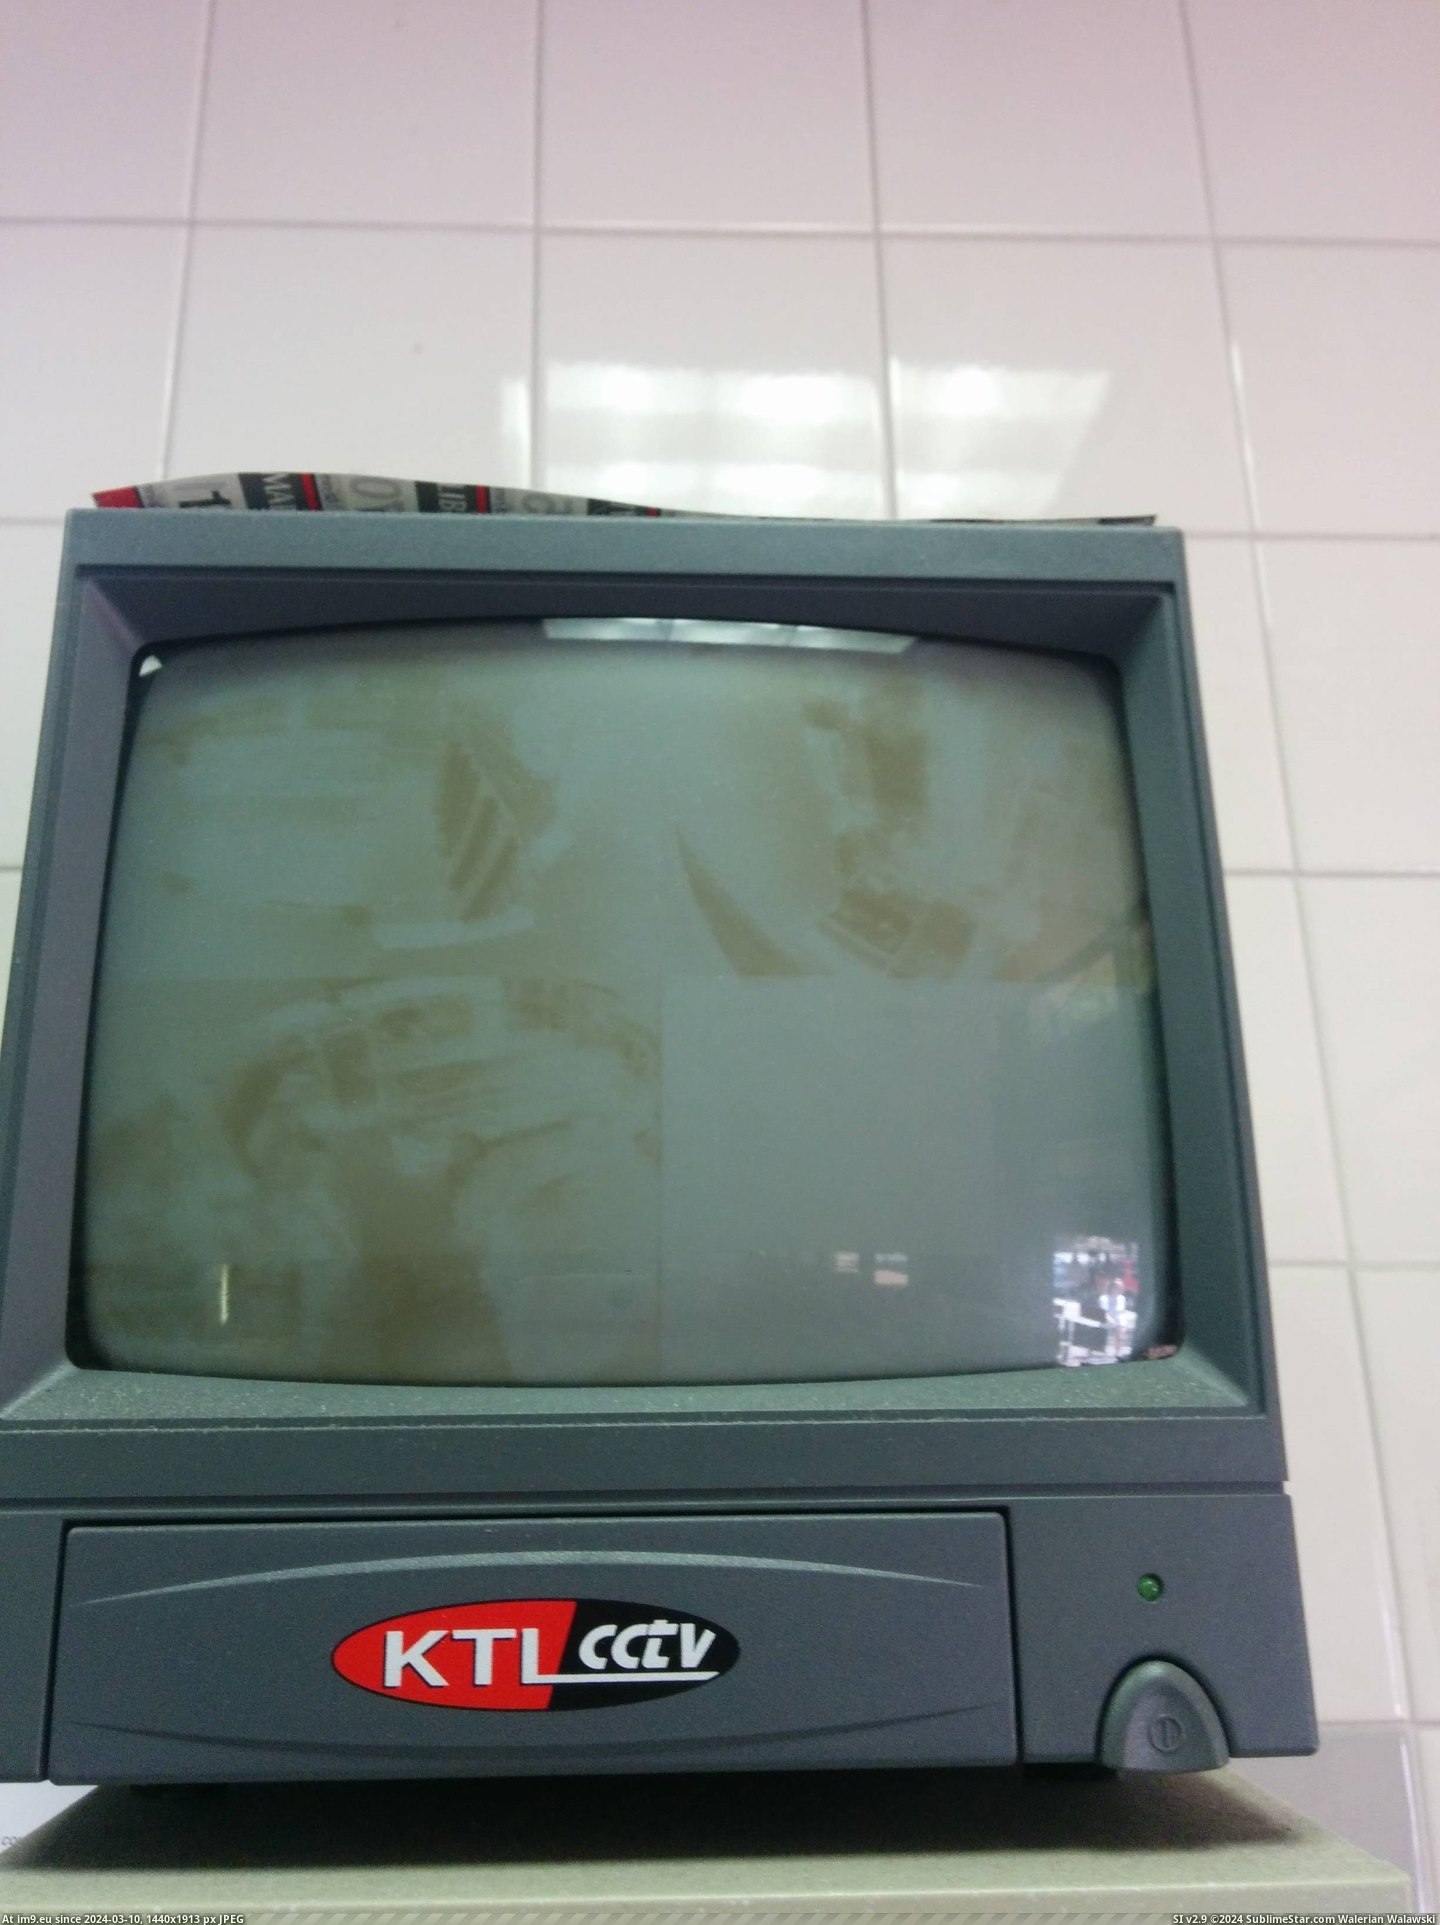 #Images #Long #Security #Burned #Store #Camera [Mildlyinteresting] This security camera TV has been on so long the images of the store have been burned in. Pic. (Bild von album My r/MILDLYINTERESTING favs))